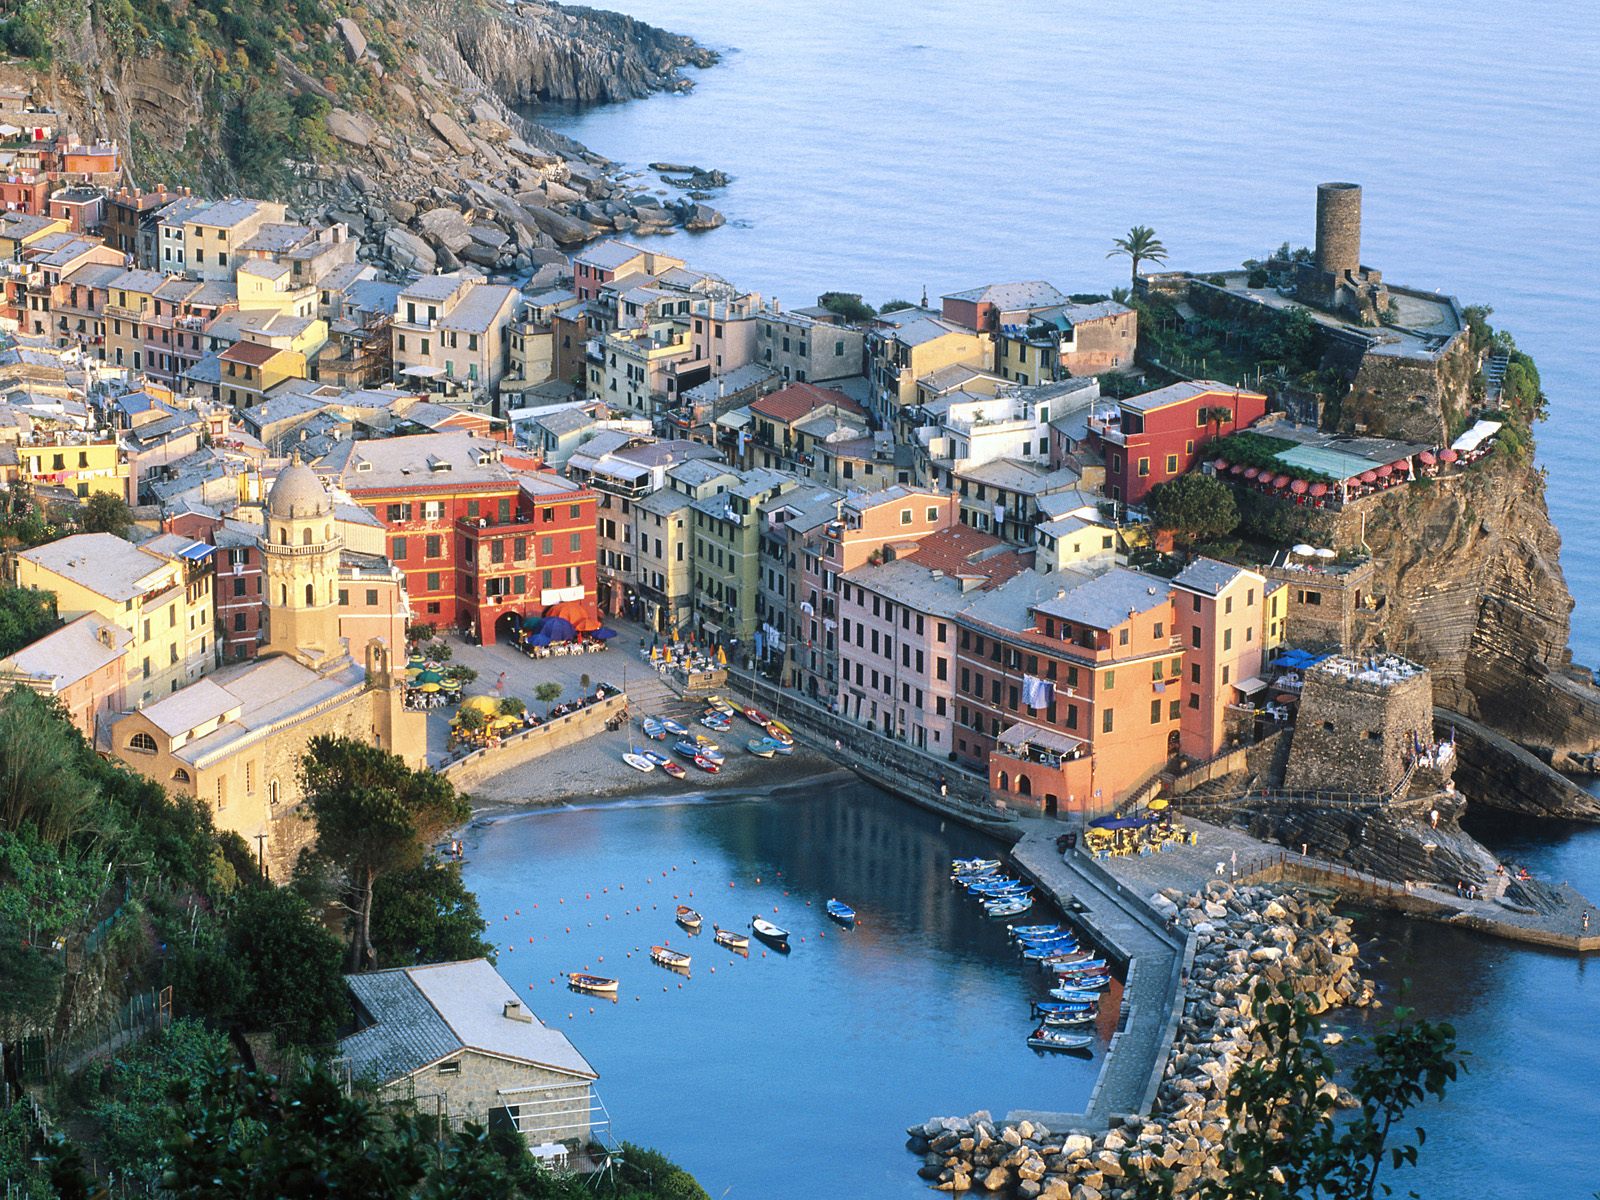 Read more about the Top 5 places to visit in Italy and